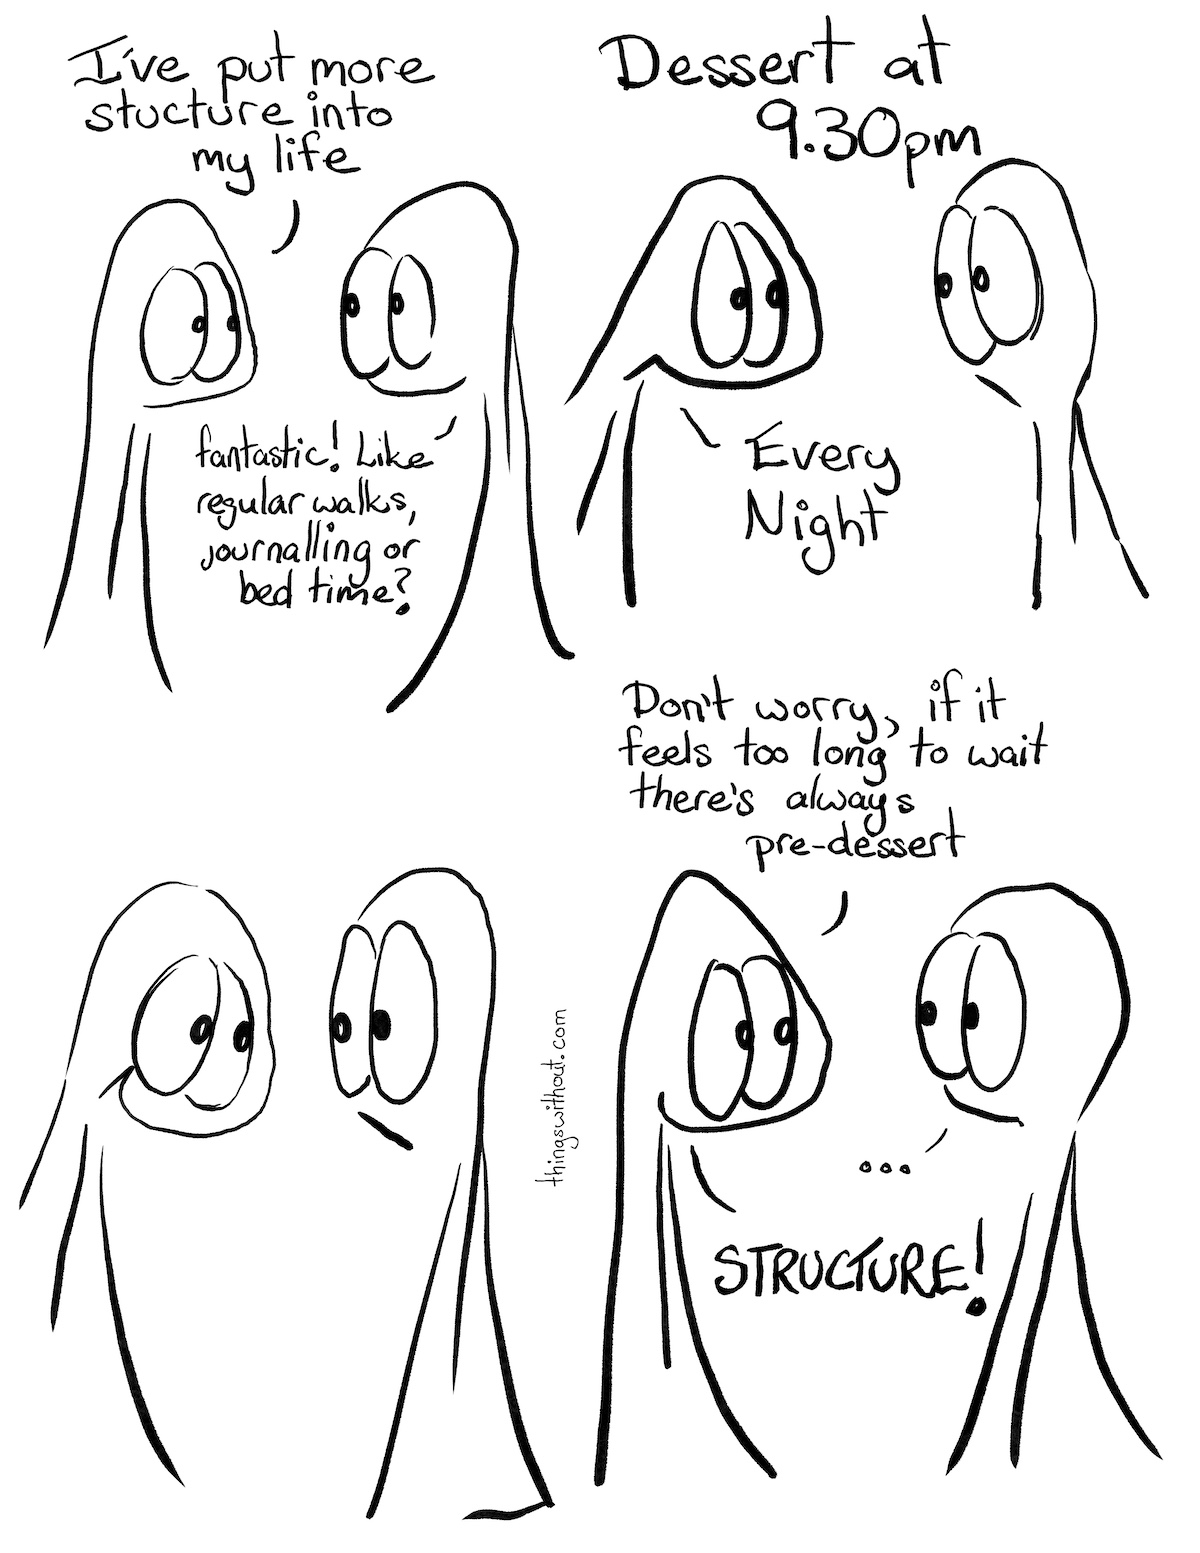 Structure Comic Transcript Thing 1 and Thing 2 are talking. Thing 1: I've put more structure into my life. Thing 2: Fantastic! Like regular works, journalling or bed time? Thing 1 enthusiastically thrusts their head forward. Thing 2 looks a little worried. Thing 1: Dessert at 9:30pm Thing 1: Every Night. Thing 1 has a big goofy grin. Thing 2 looks a little non plussed. Thing 1: Don't worry, if it feels too long to wait there's always pre-dessert. Thing 2: ... Thing 1: STRUCTURE!